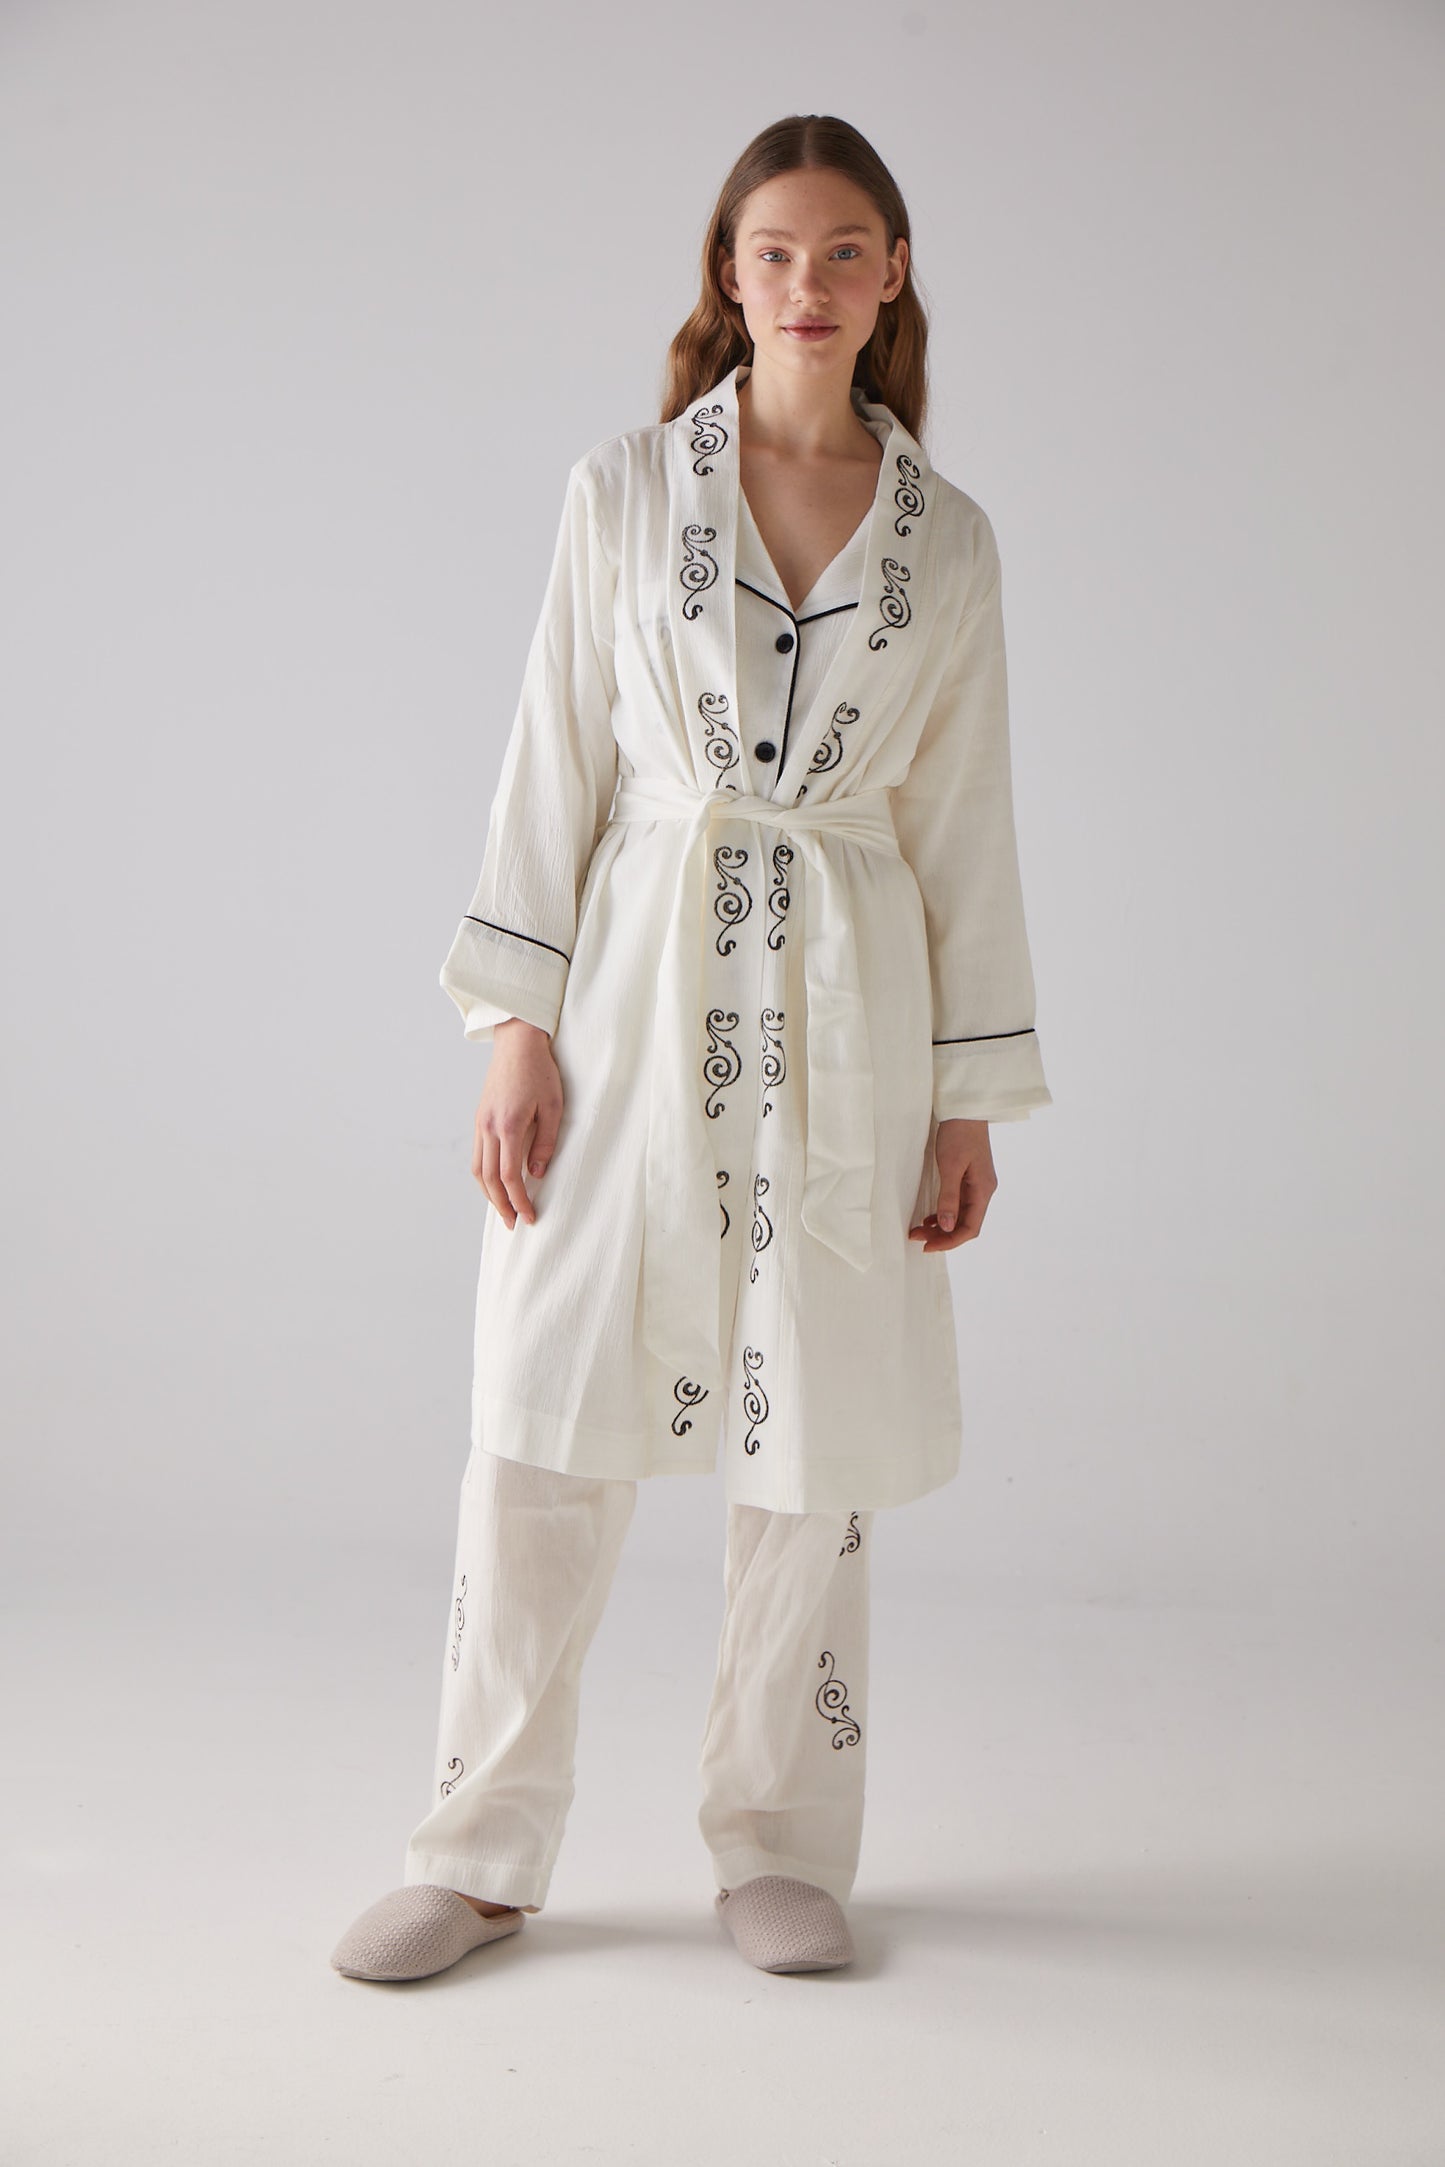 Clef woodcut patterned Morning-gown in white 100% organic cotton